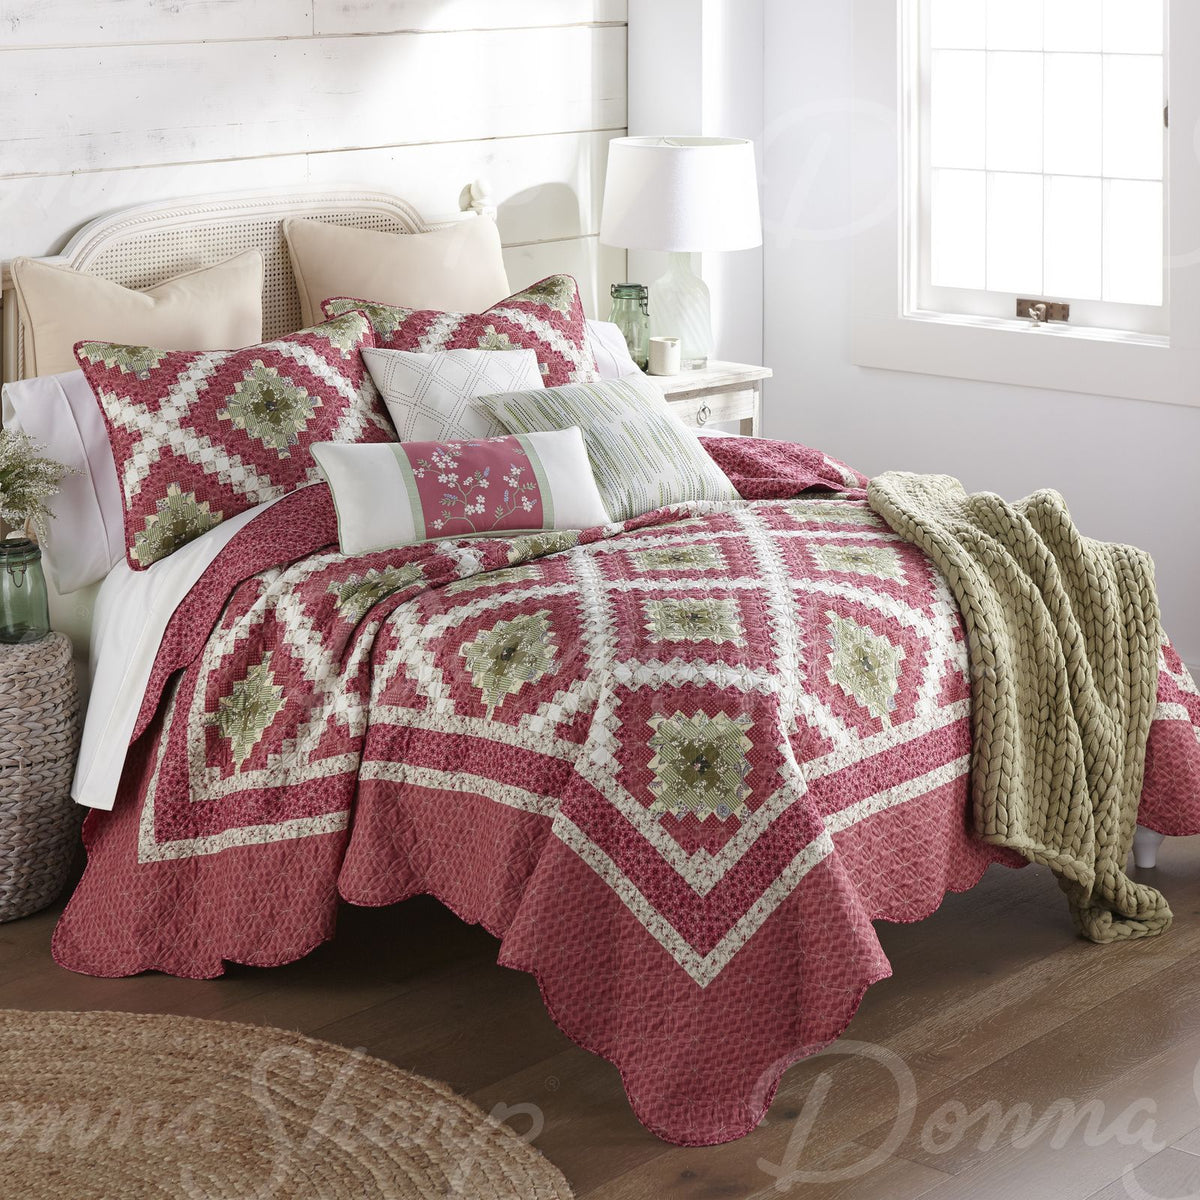 NEW ARRIVAL: Sweet Melon Quilted Collection